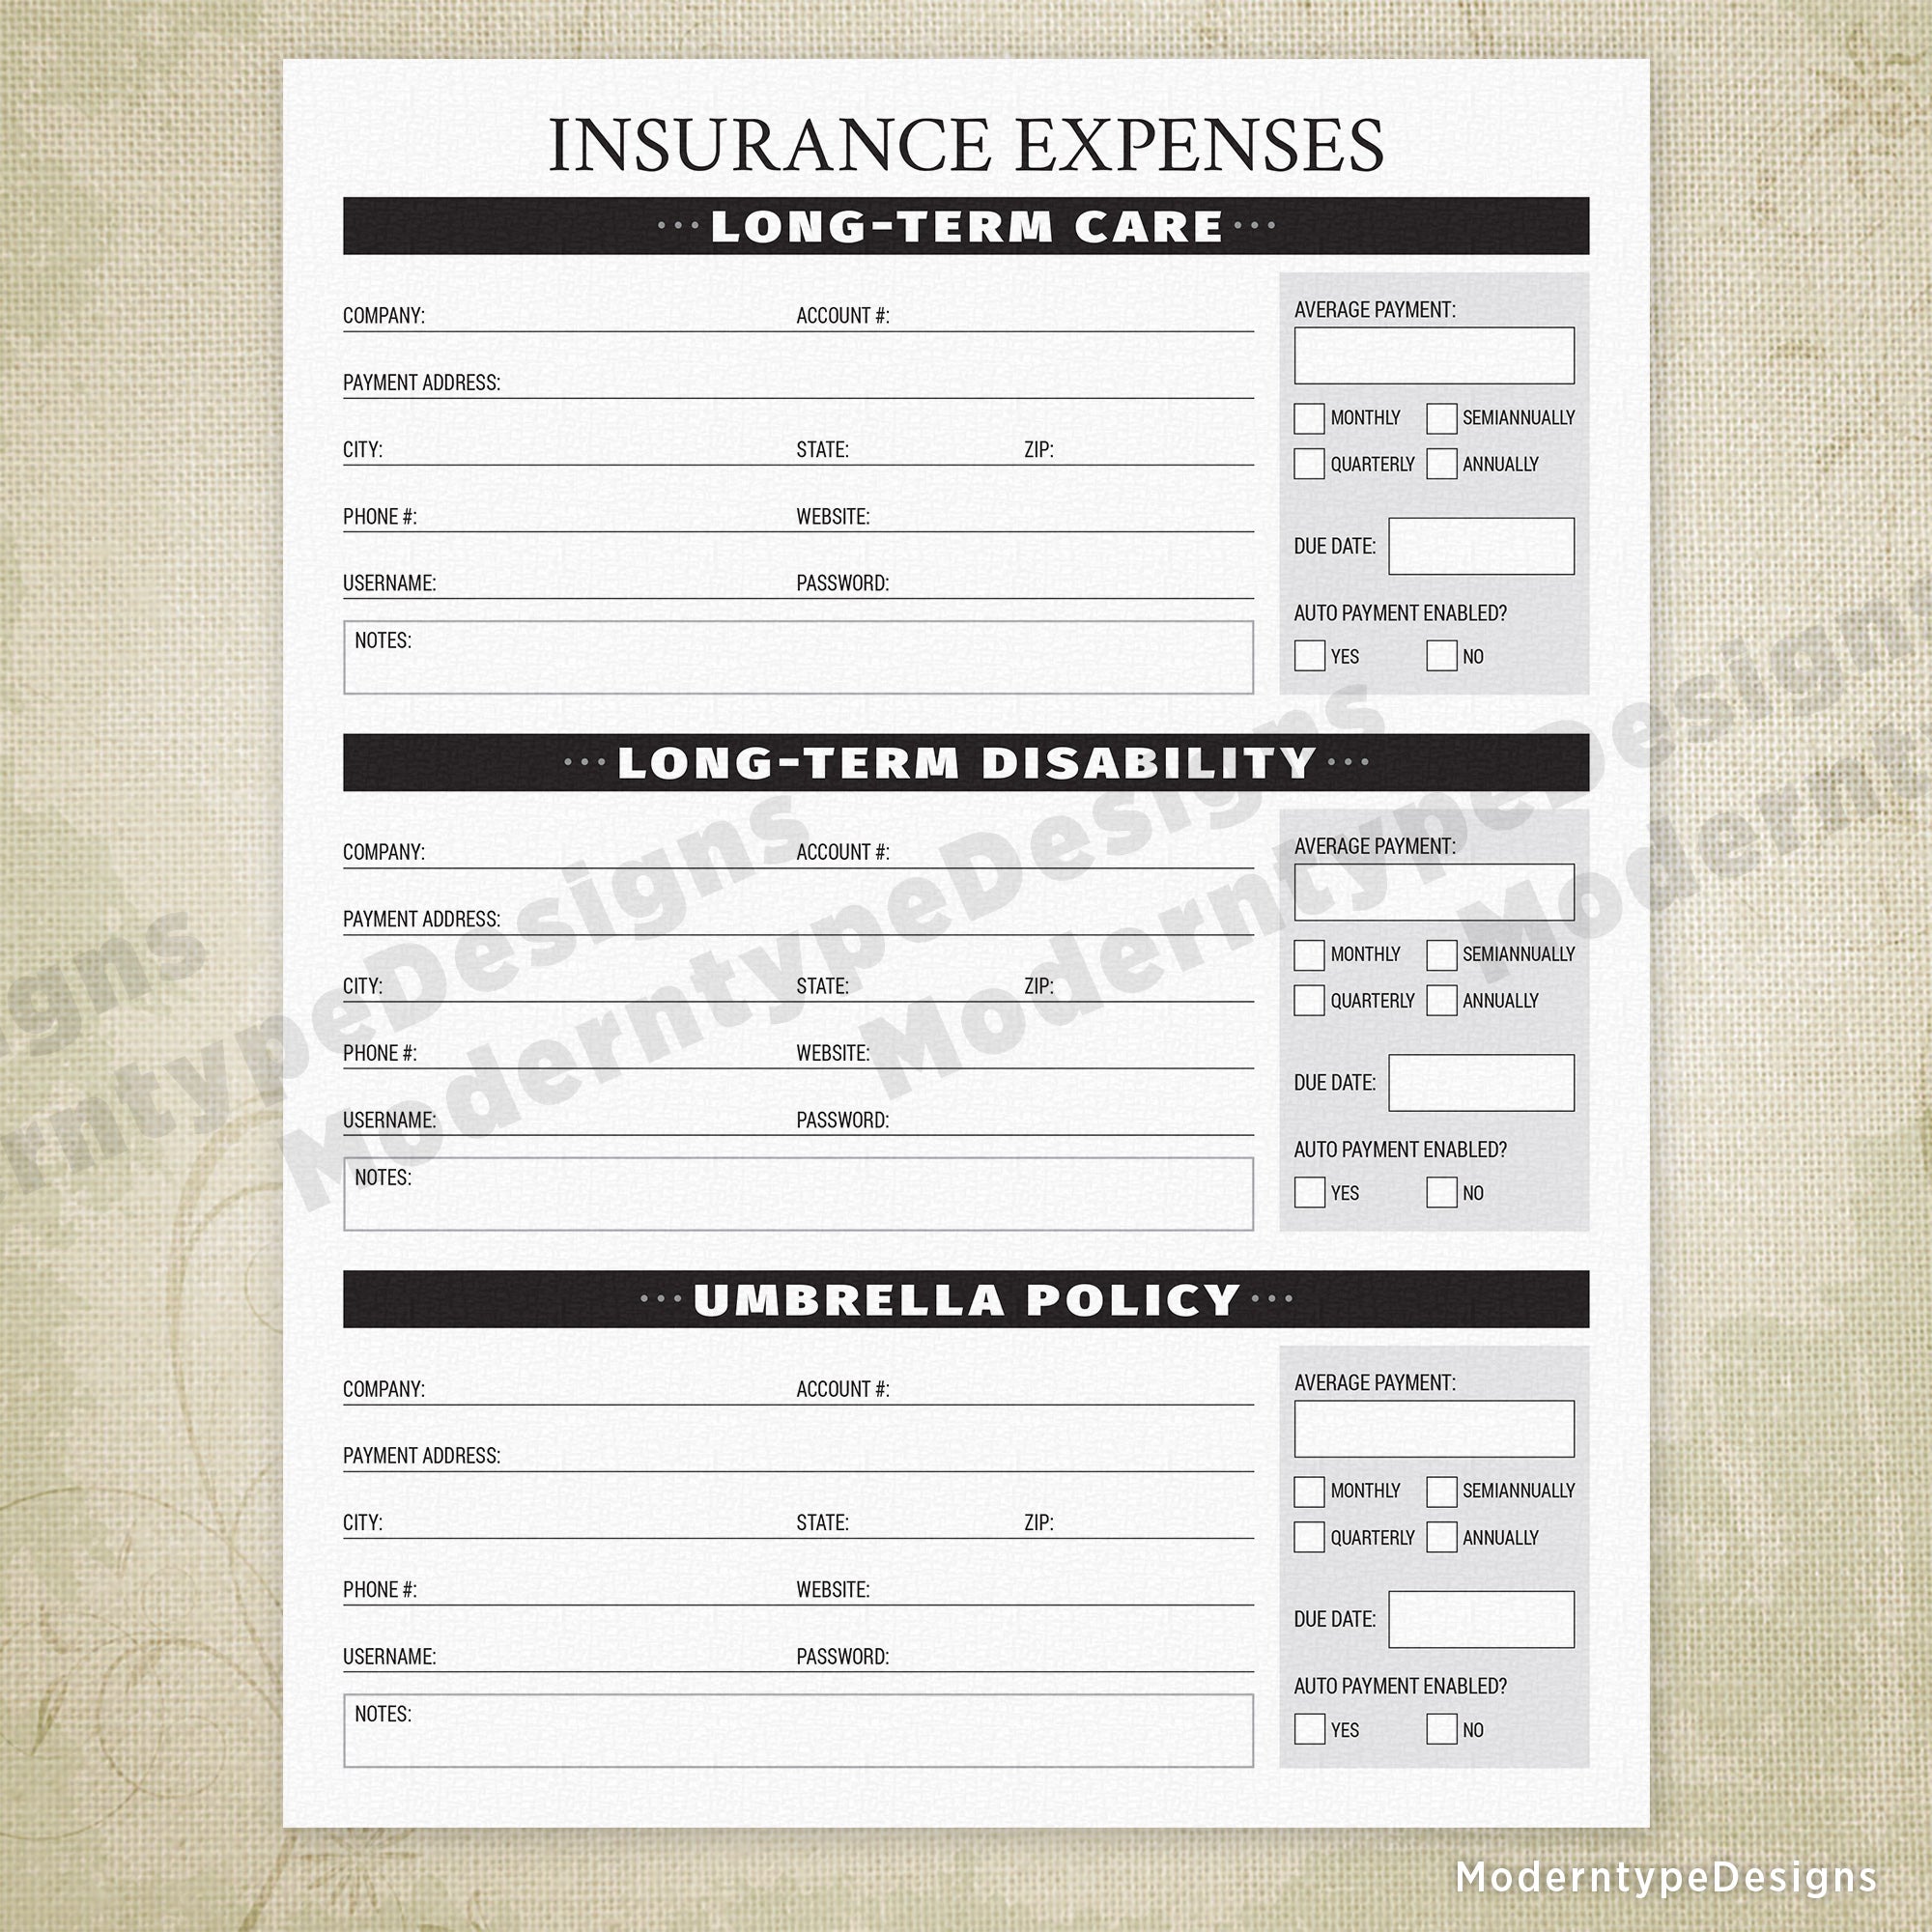 Insurance Expenses Printable - End of Life